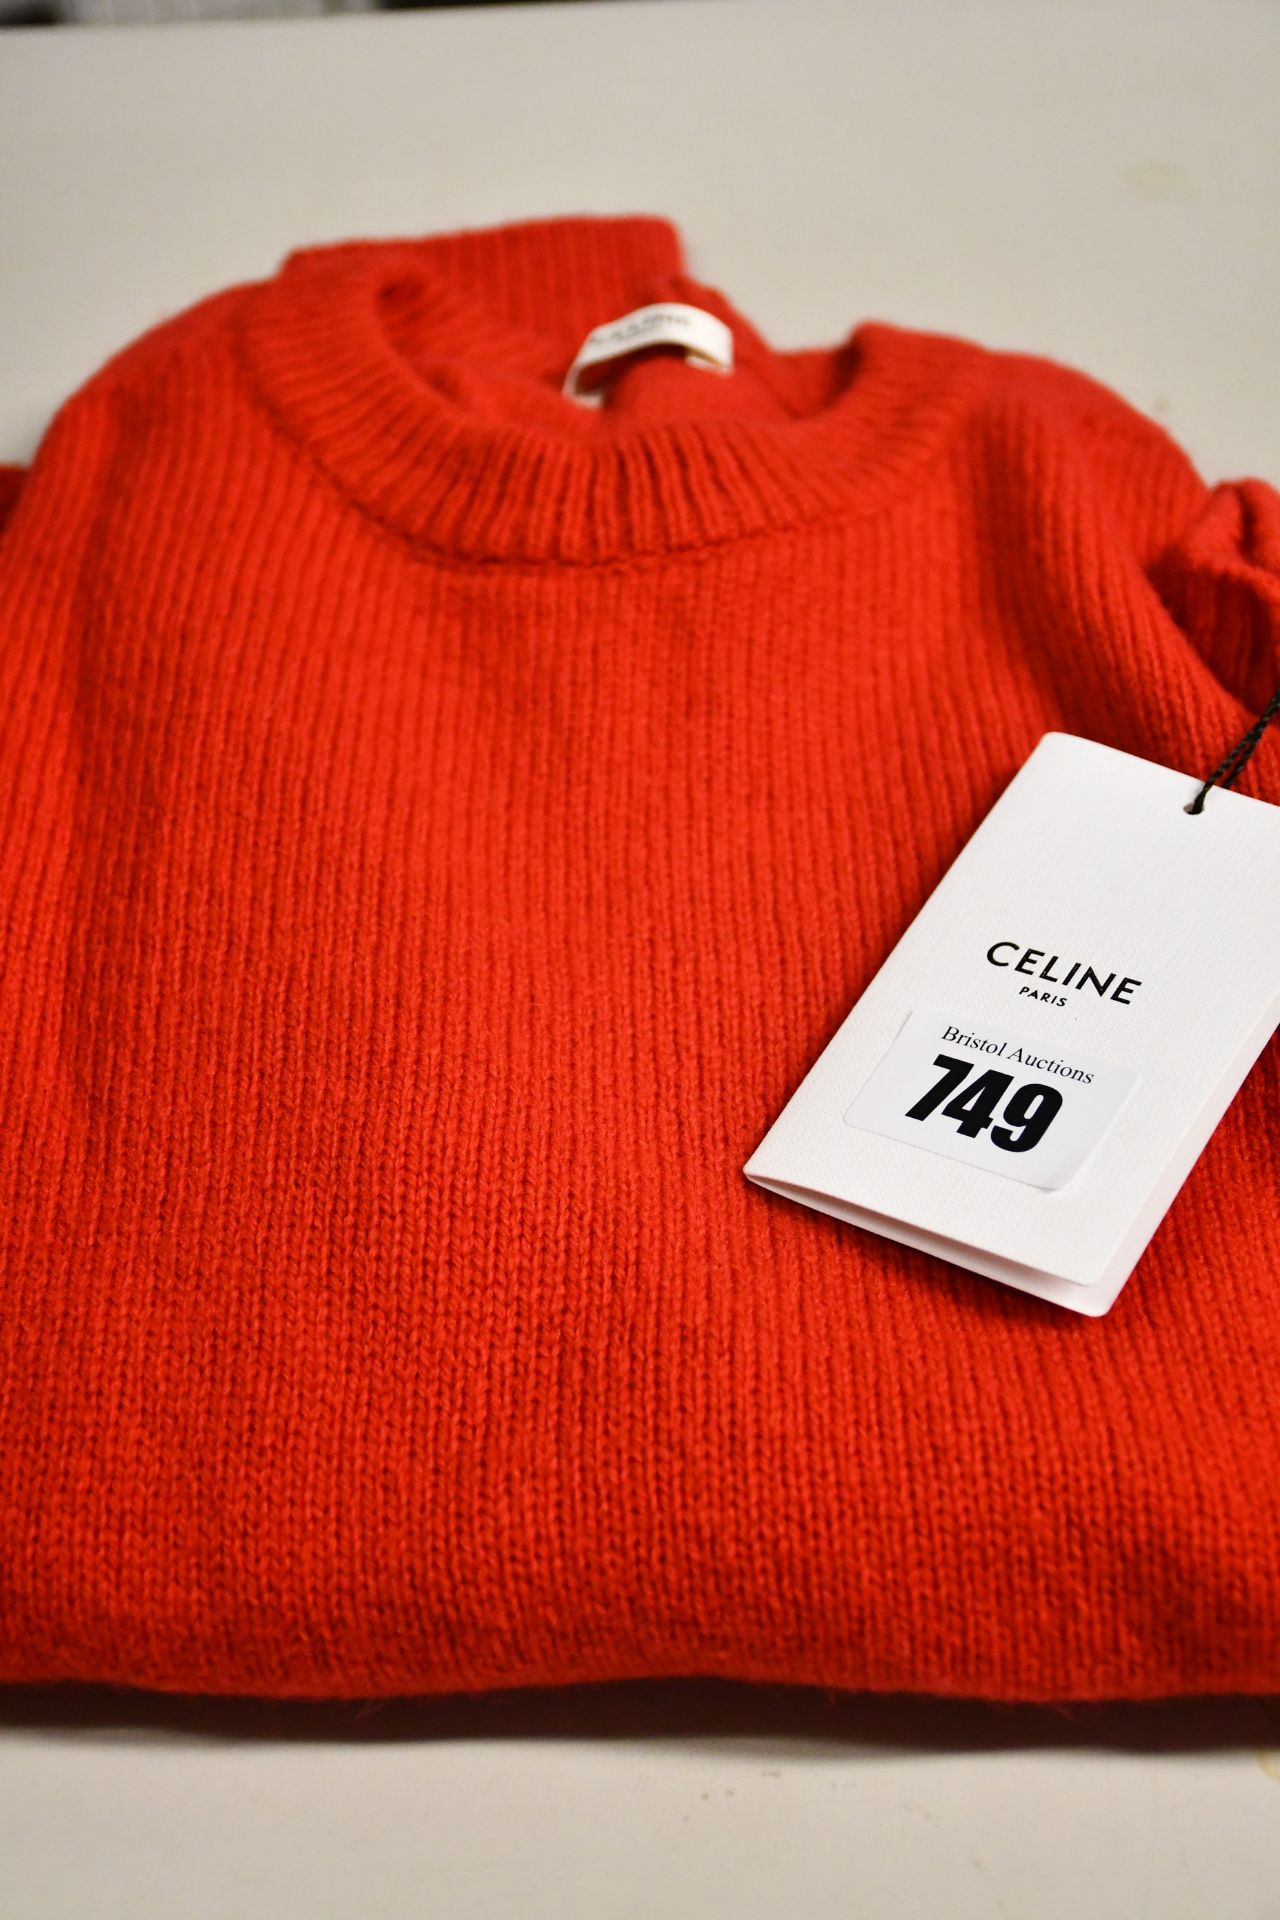 An as new Celine Knitwear red jumper with label.